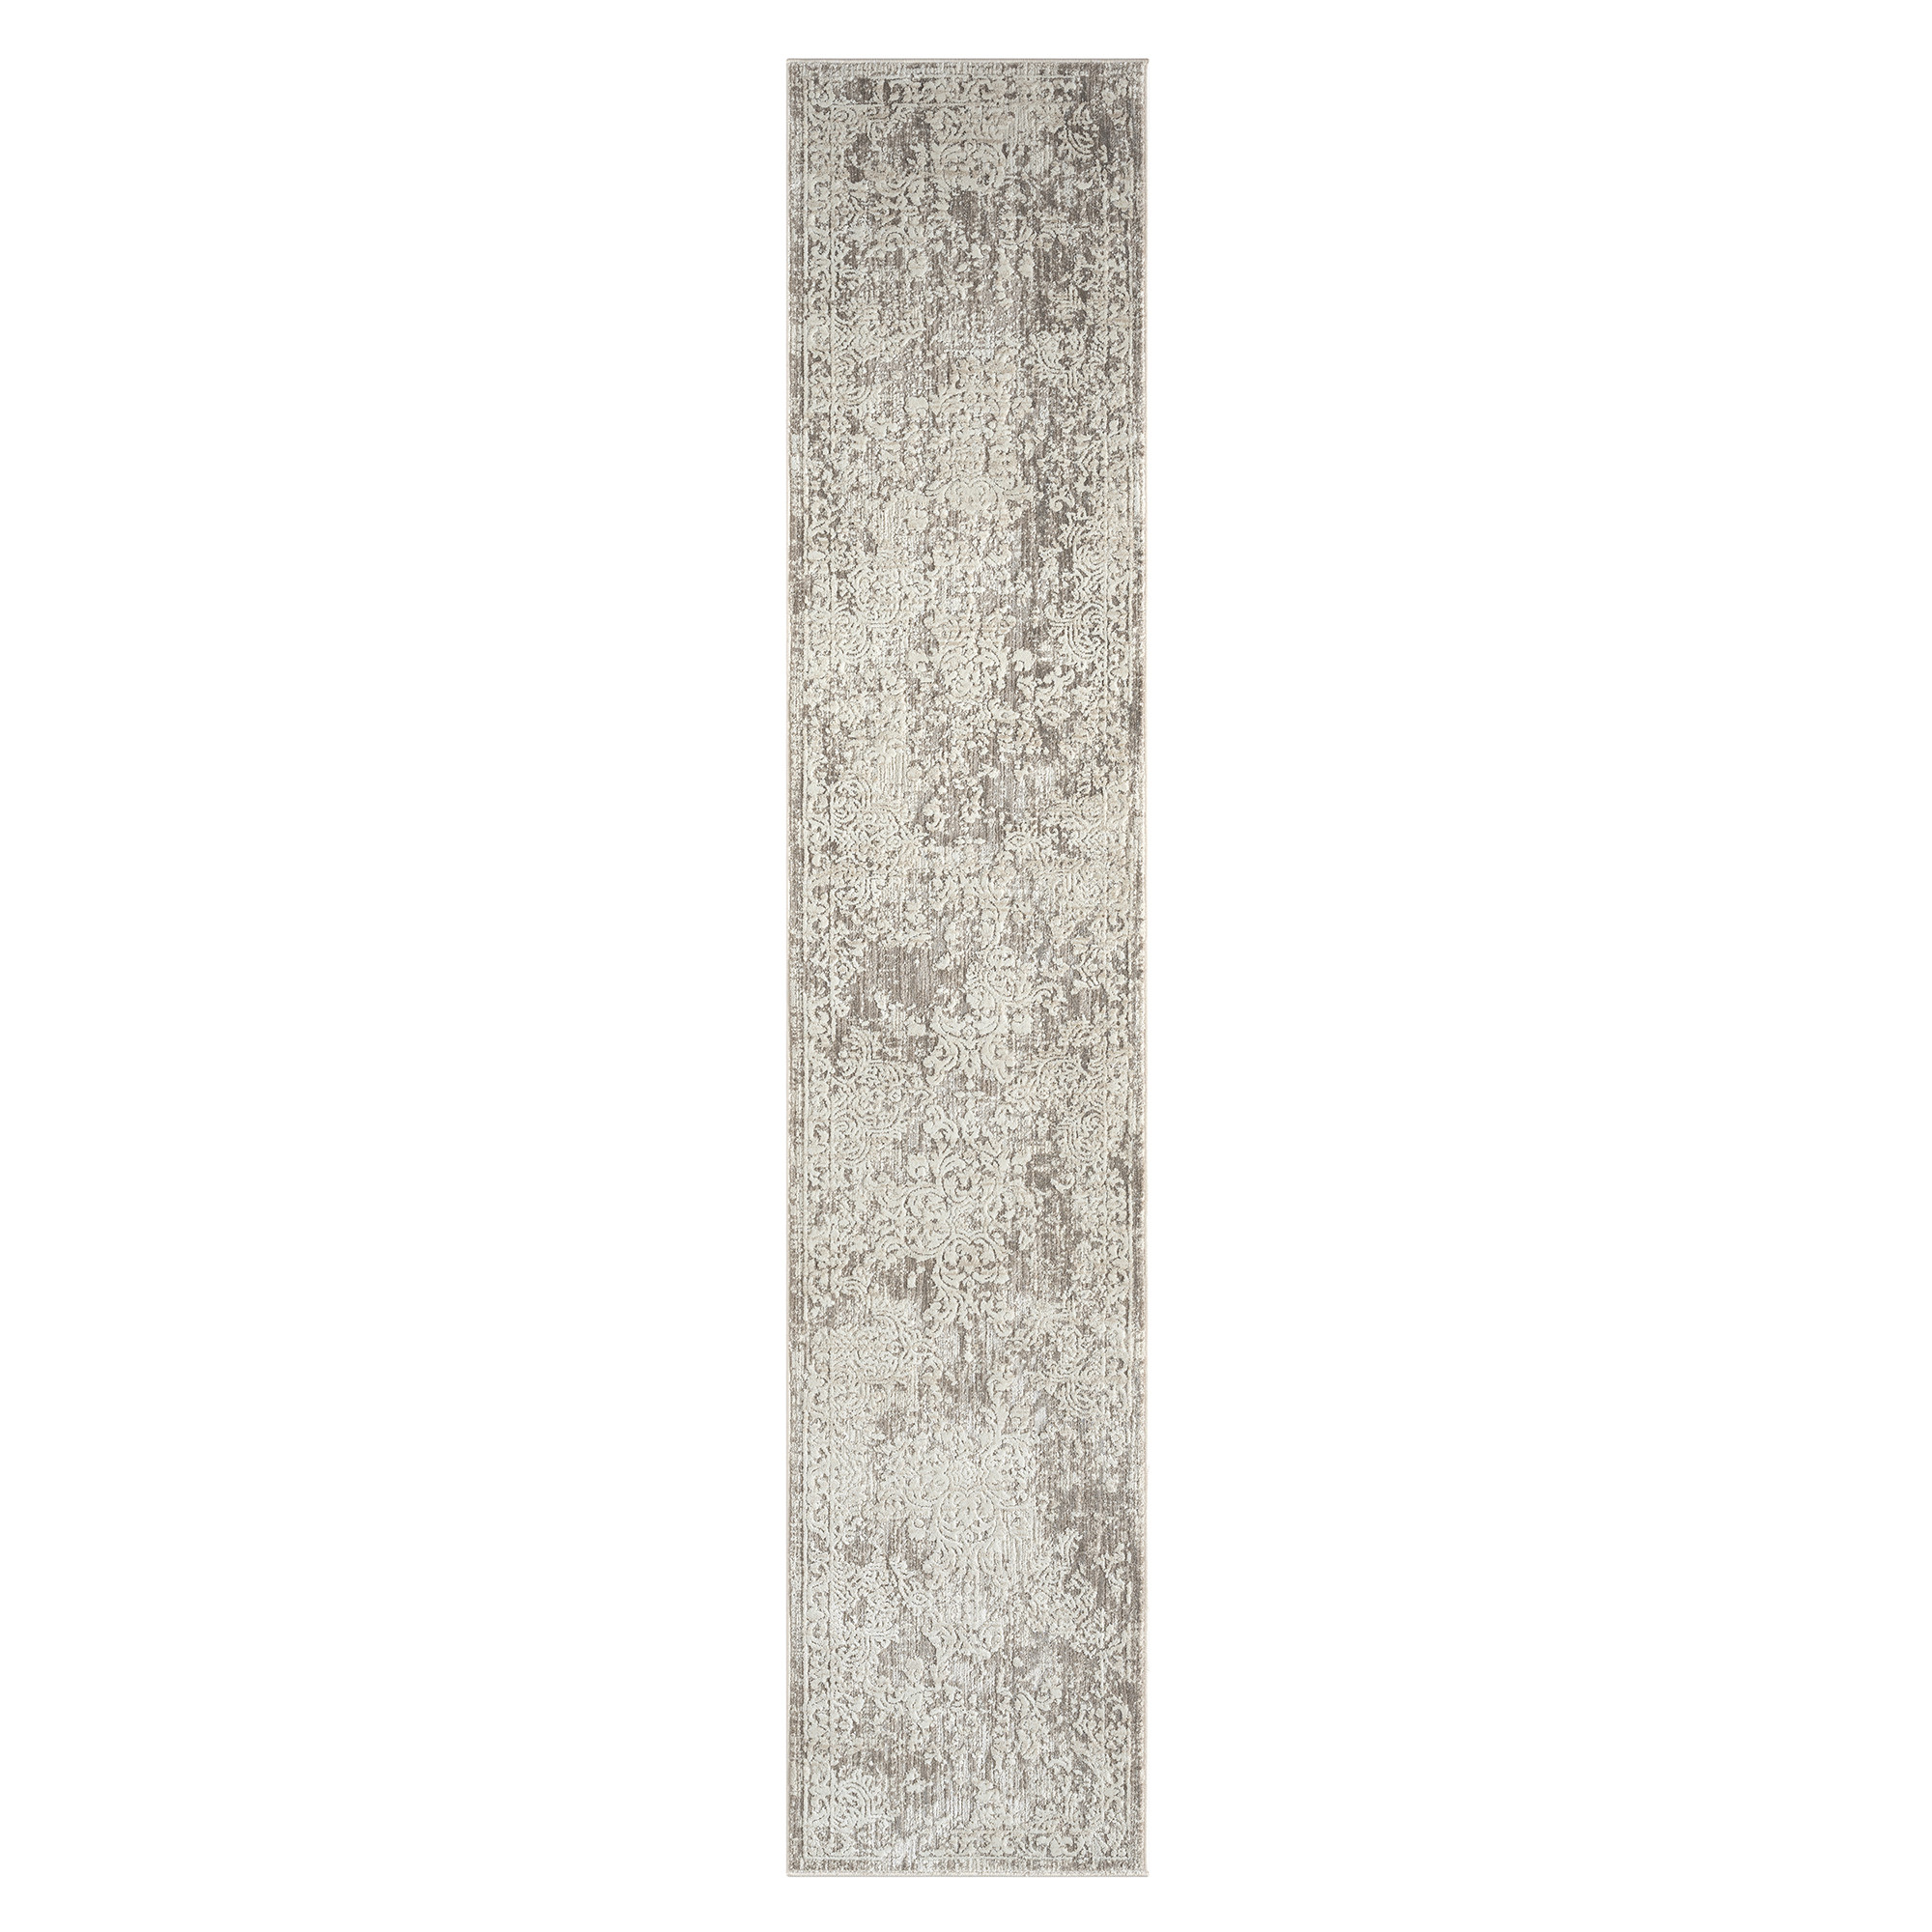 2' X 8' Gray Abstract Distressed Runner Rug-515832-1